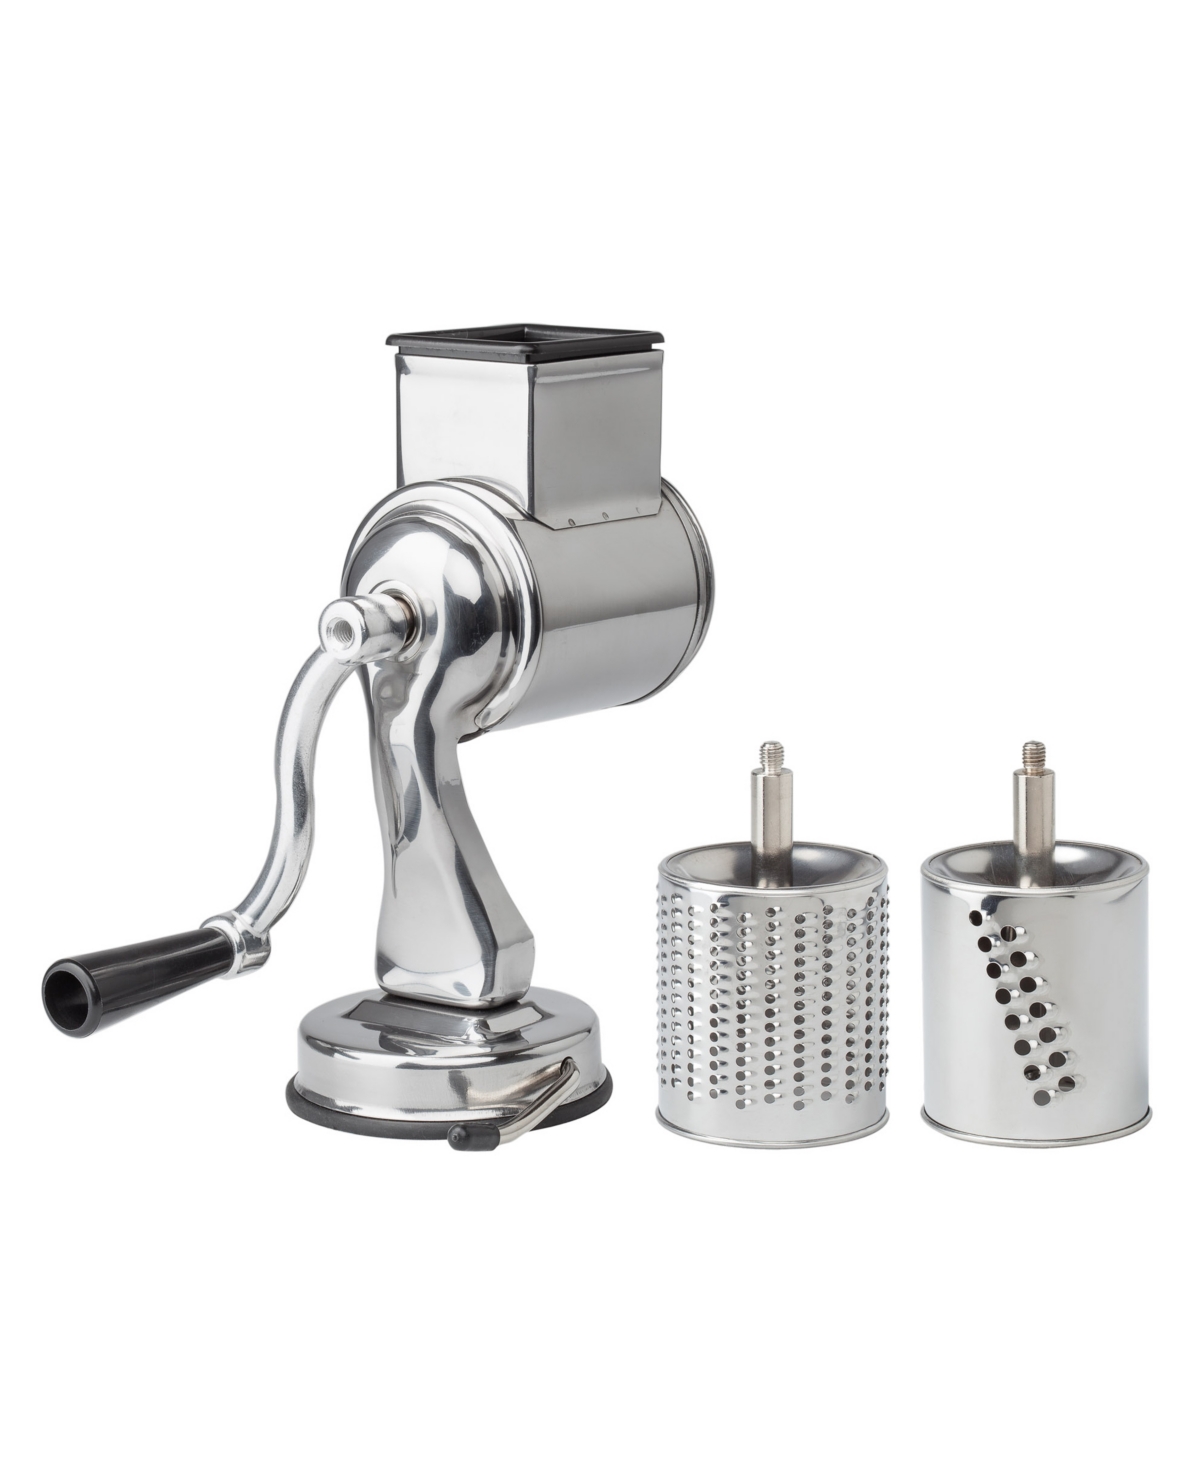 Fante’s Suction Base Cheese Grater With 2 Grating Drums, The Italian Market Original Since 1906 In Silver